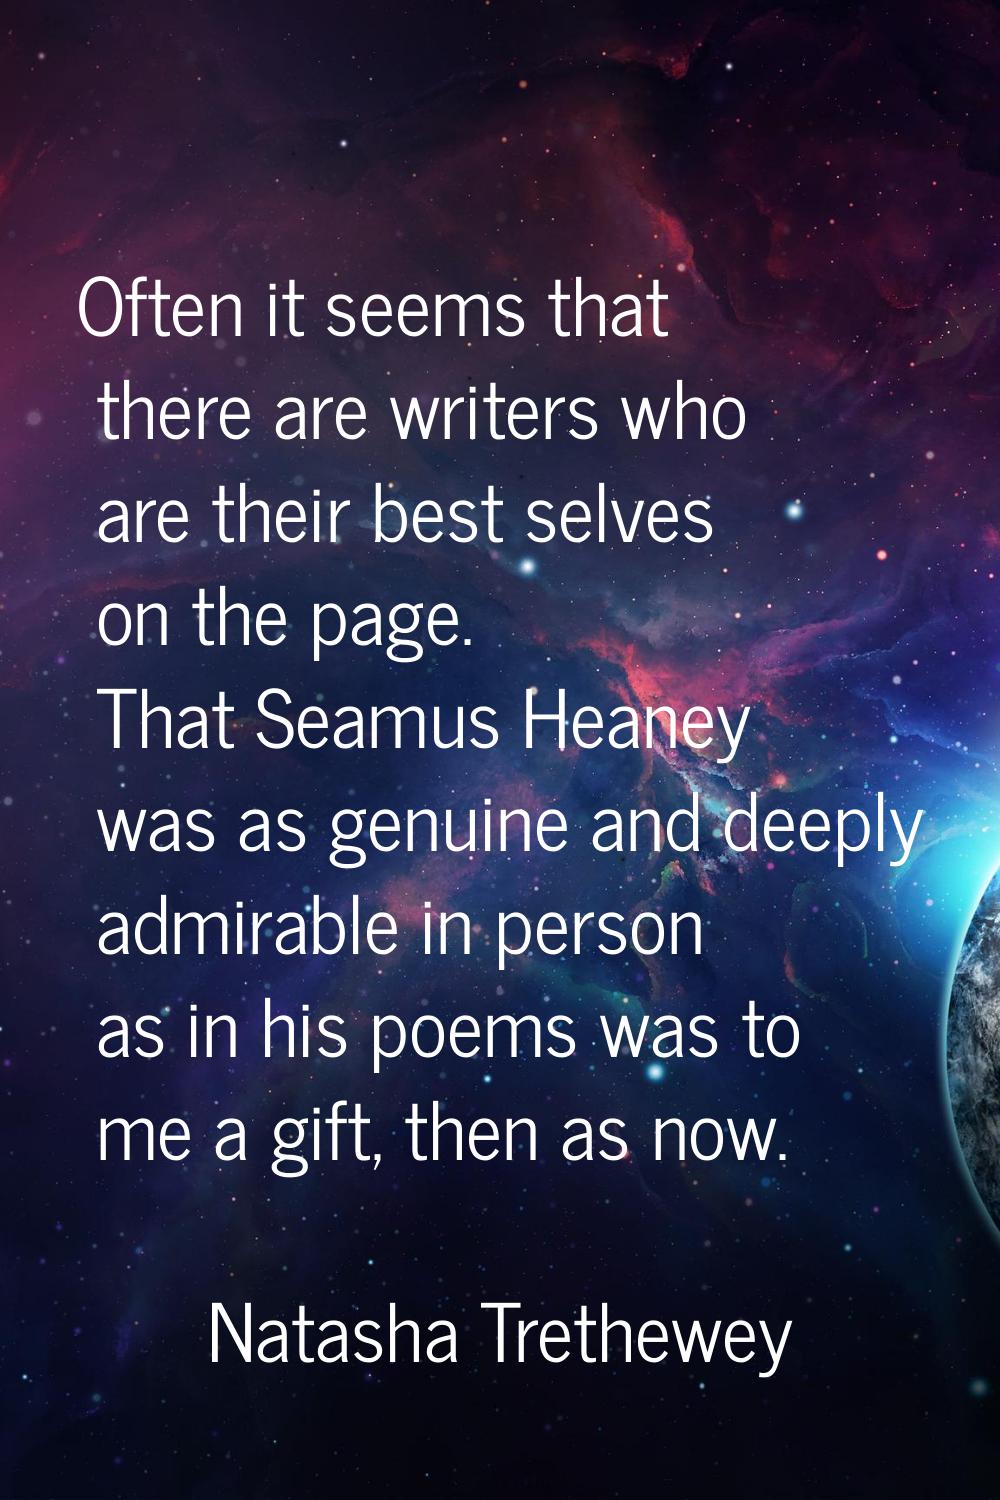 Often it seems that there are writers who are their best selves on the page. That Seamus Heaney was